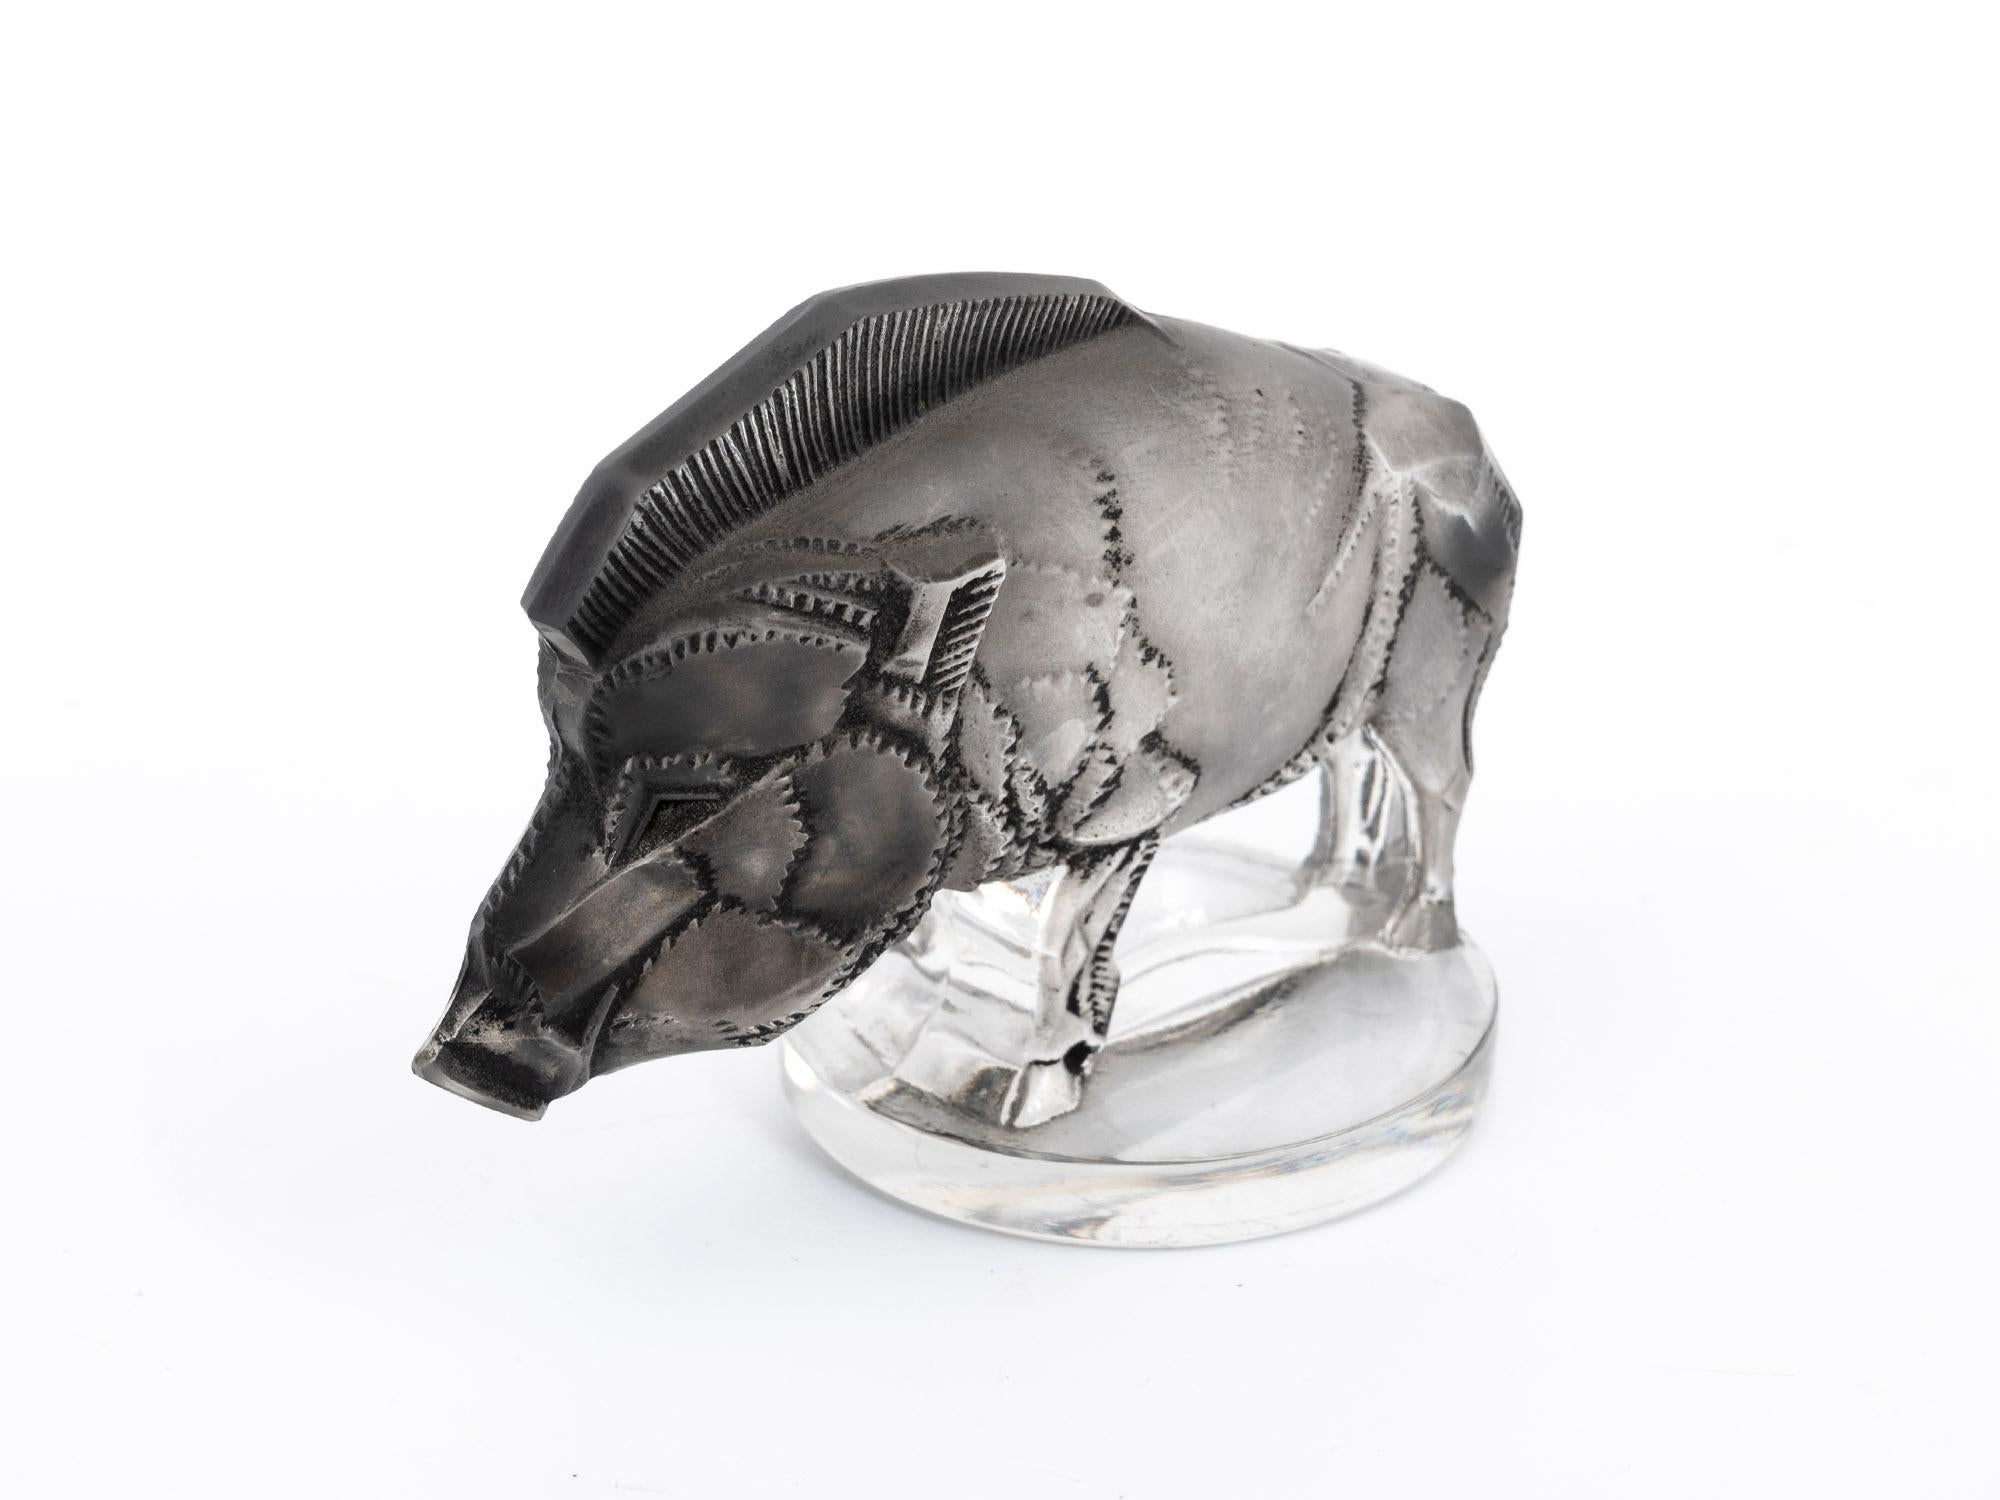 This Sanglier (Wild Boar) car Mascot was designed and produced by renowned glassmaker René Lalique.

Model #1157, René Lalique's car mascot of the Sanglier (wild boar) is a striking display piece.

An exceptionally beautiful black and grey